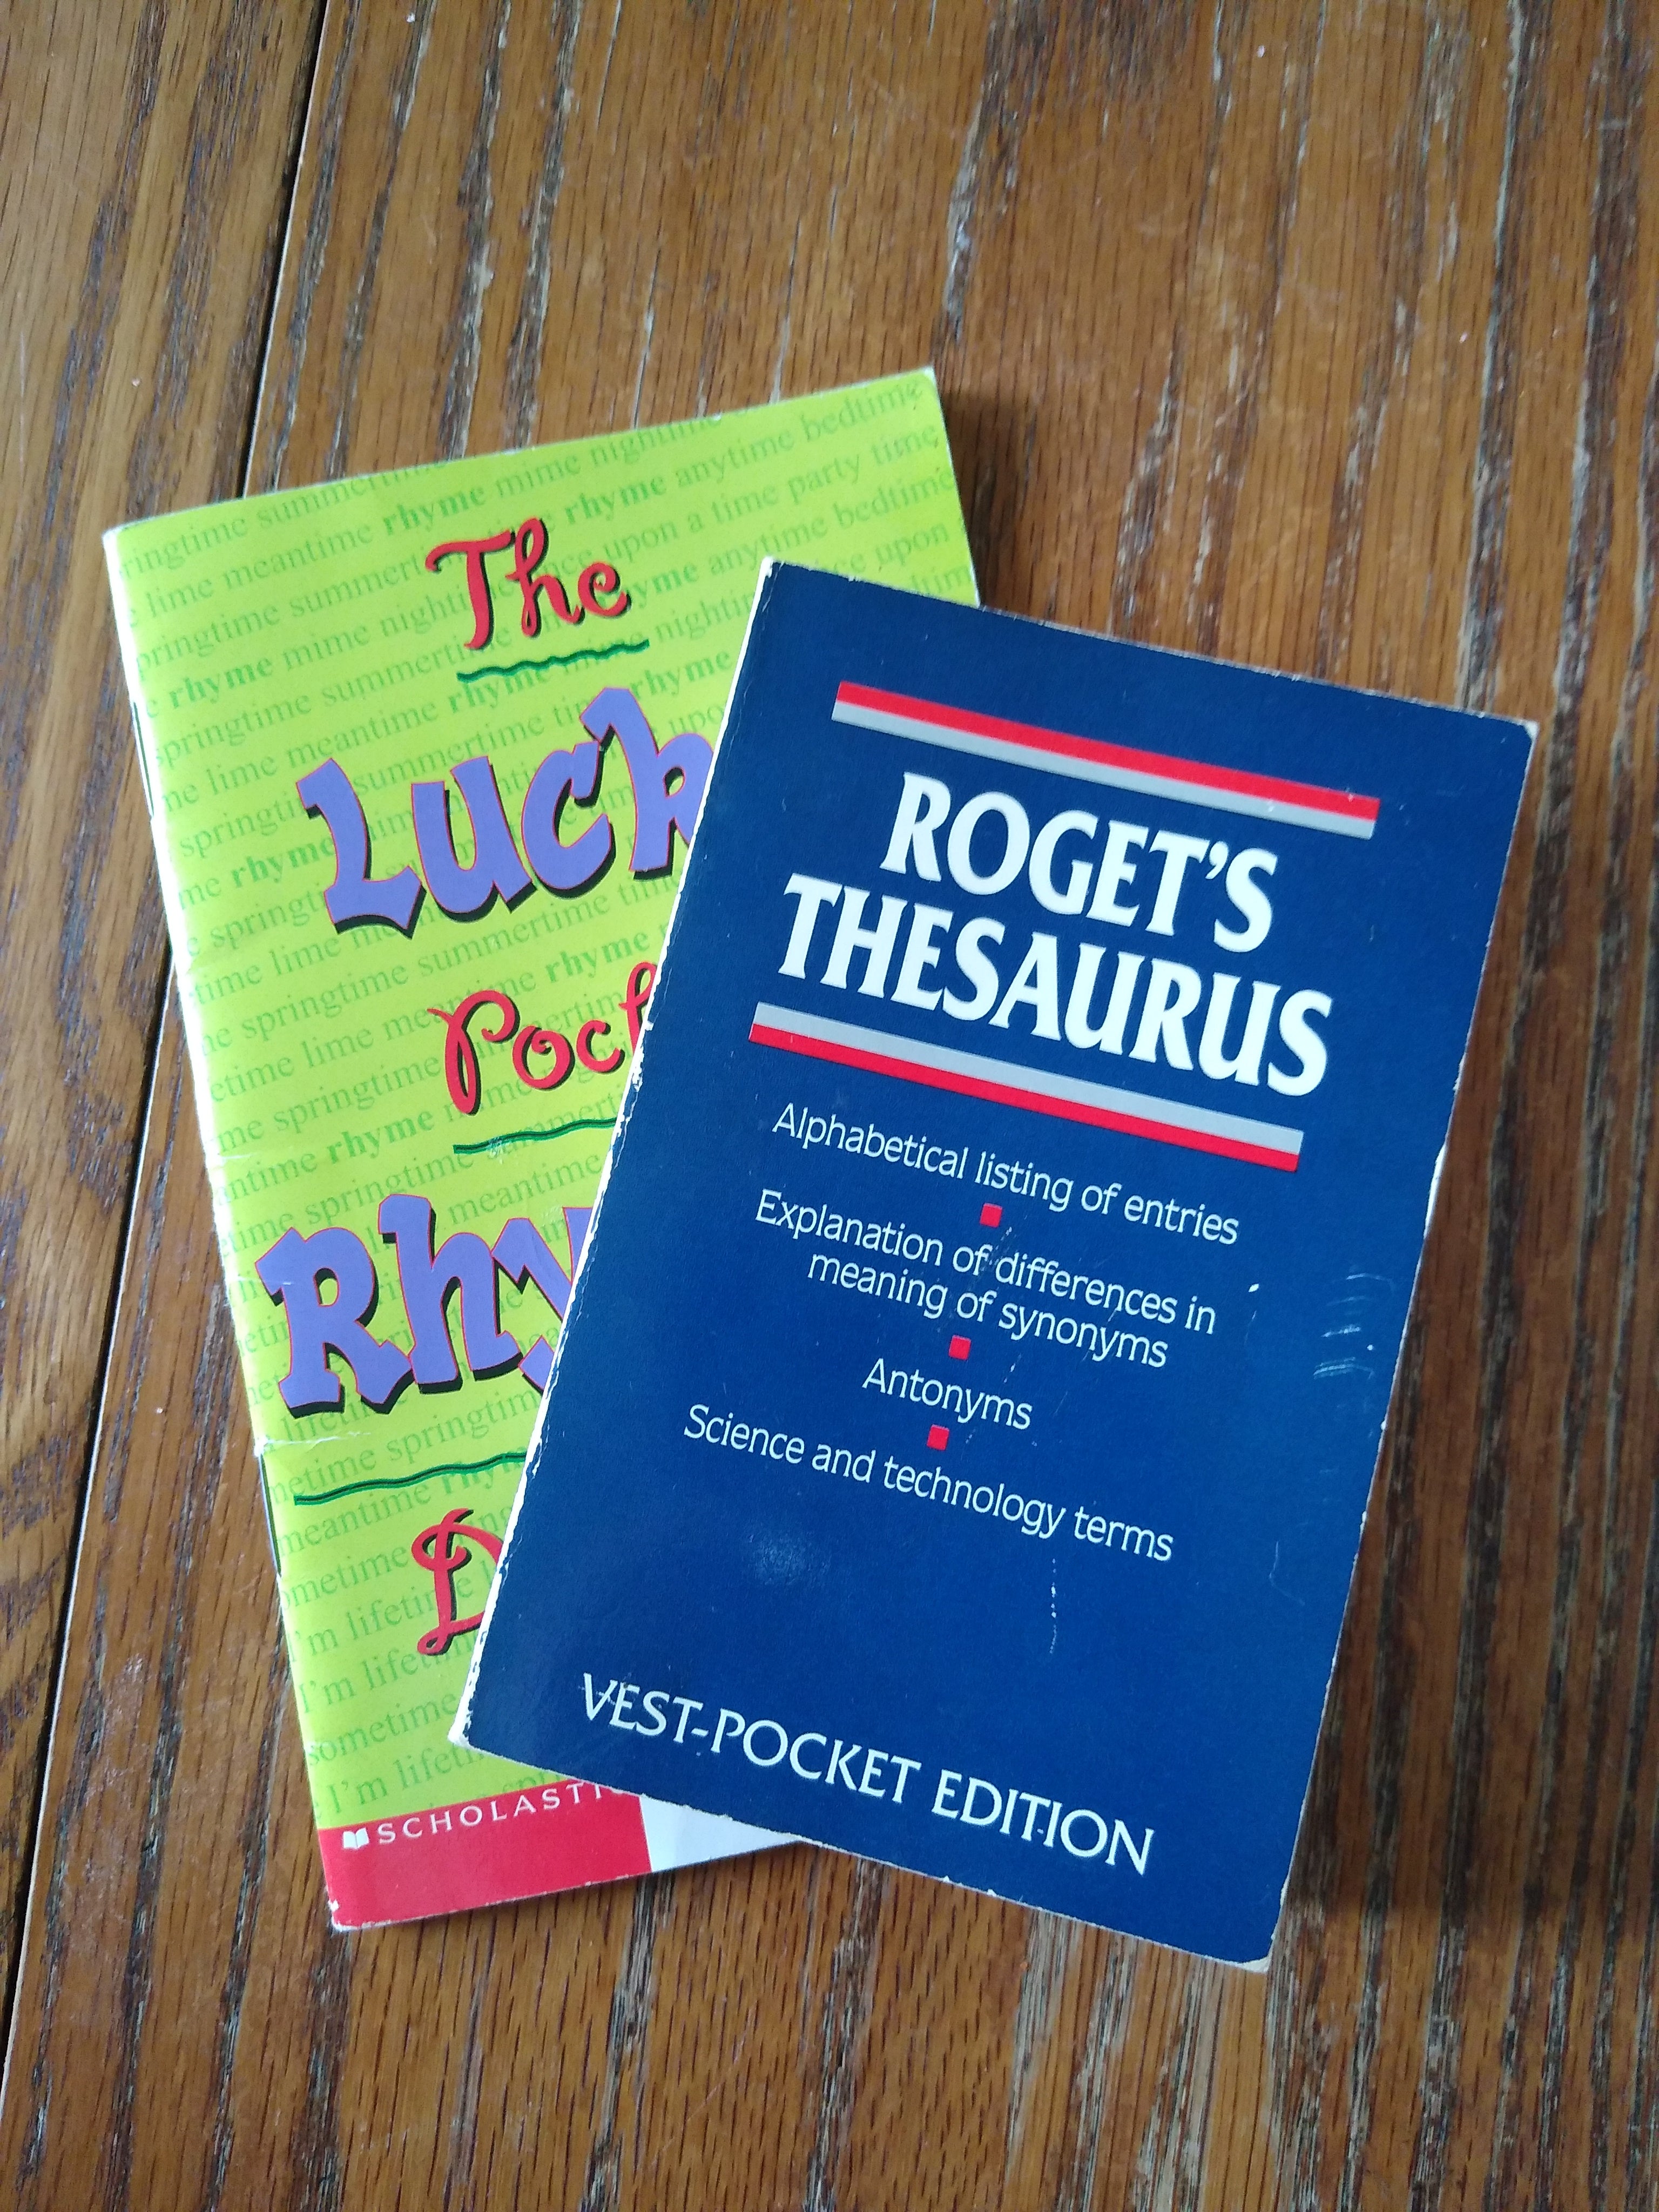 Vest-Pocket　by　Heritage　Books　Paperback　Edition　American　Pango　Dictionary　Editors,　Roget's　Thesaurus,